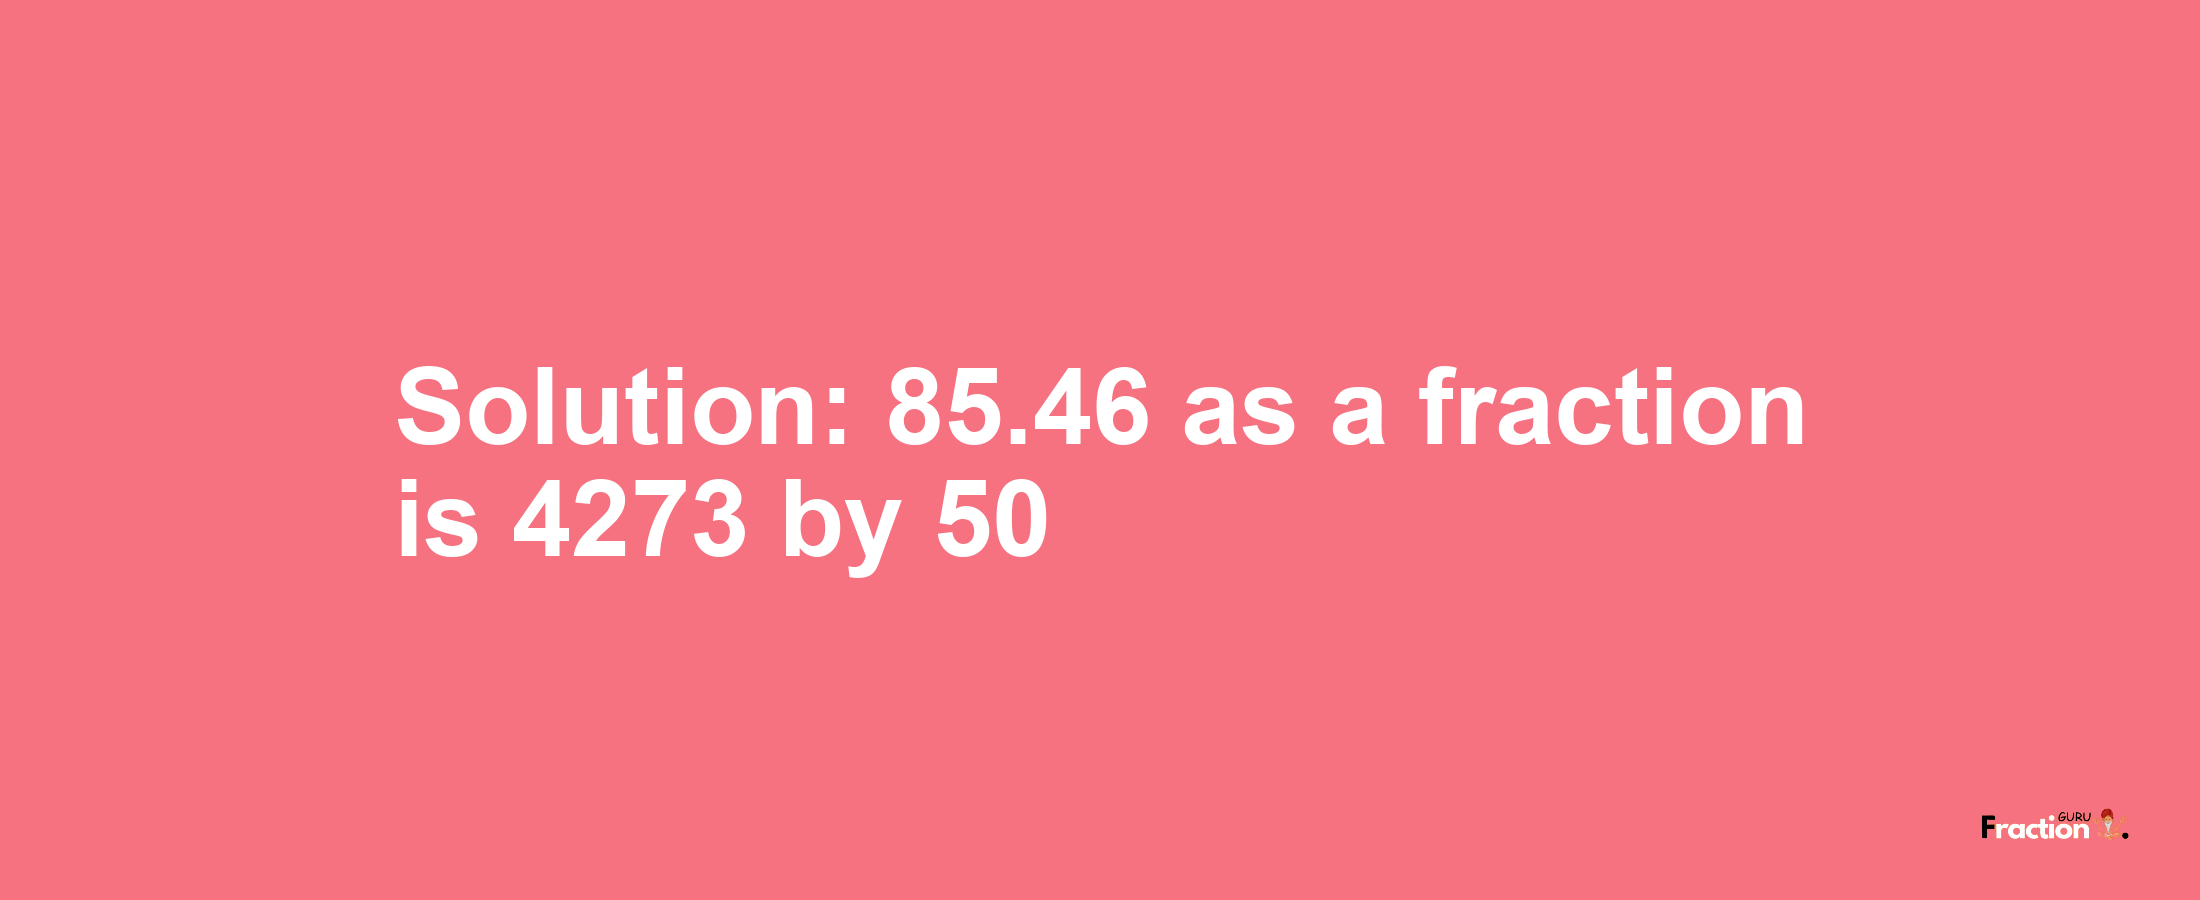 Solution:85.46 as a fraction is 4273/50